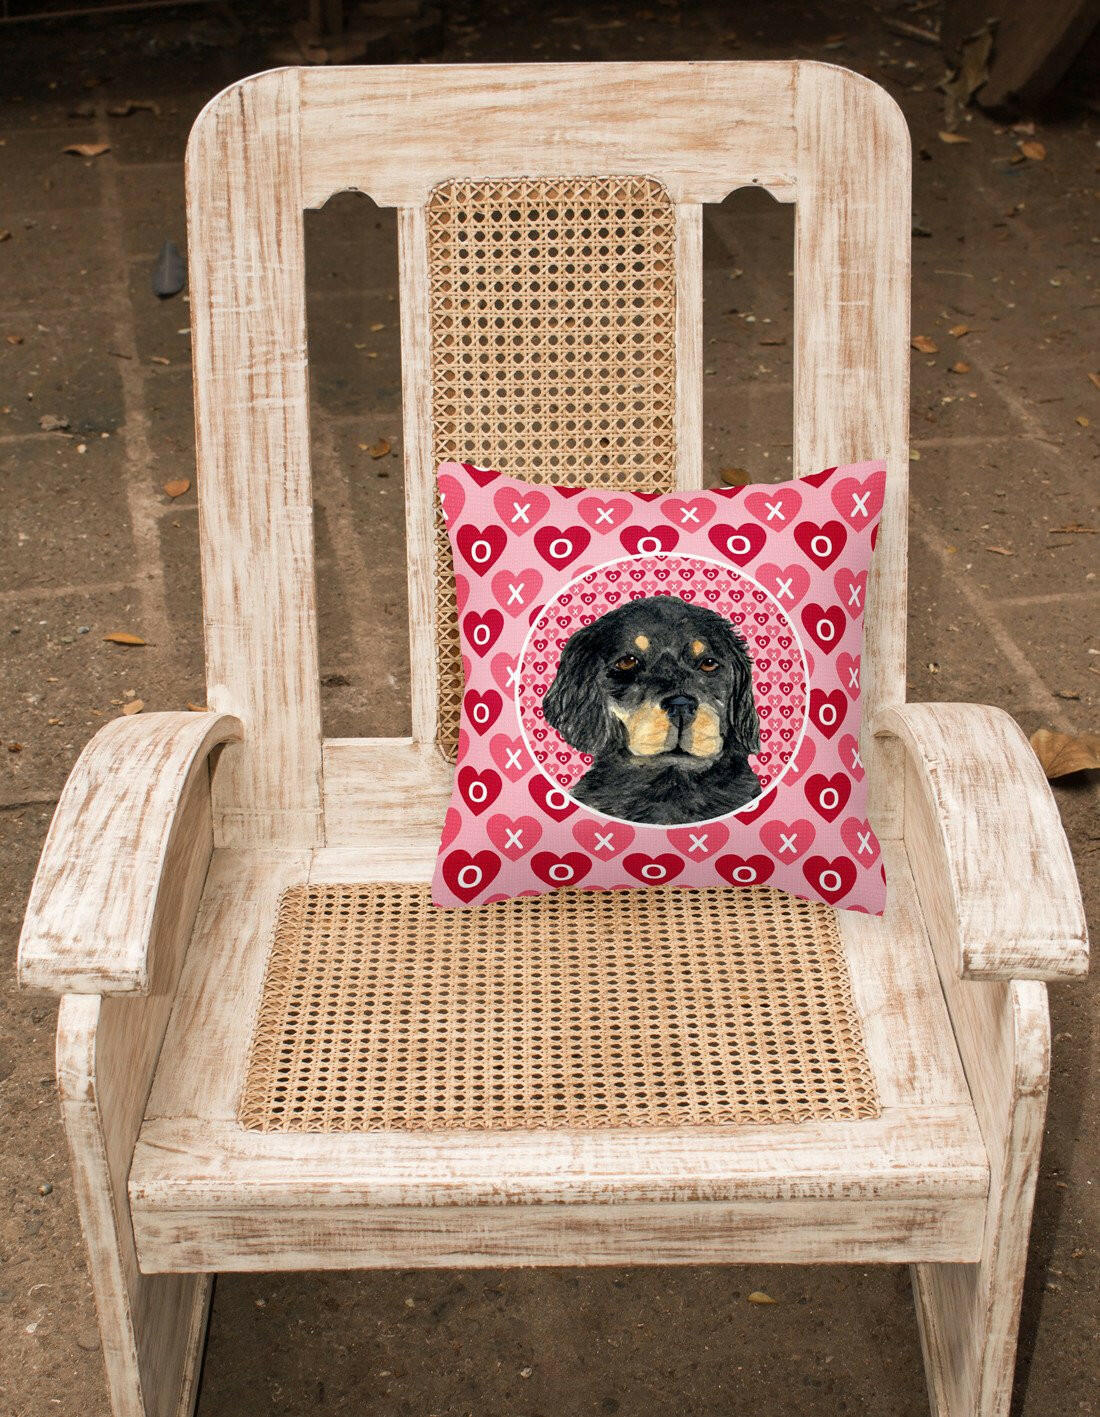 Gordon Setter Hearts Love and Valentine's Day Portrait Fabric Decorative Pillow SS4515PW1414 by Caroline's Treasures